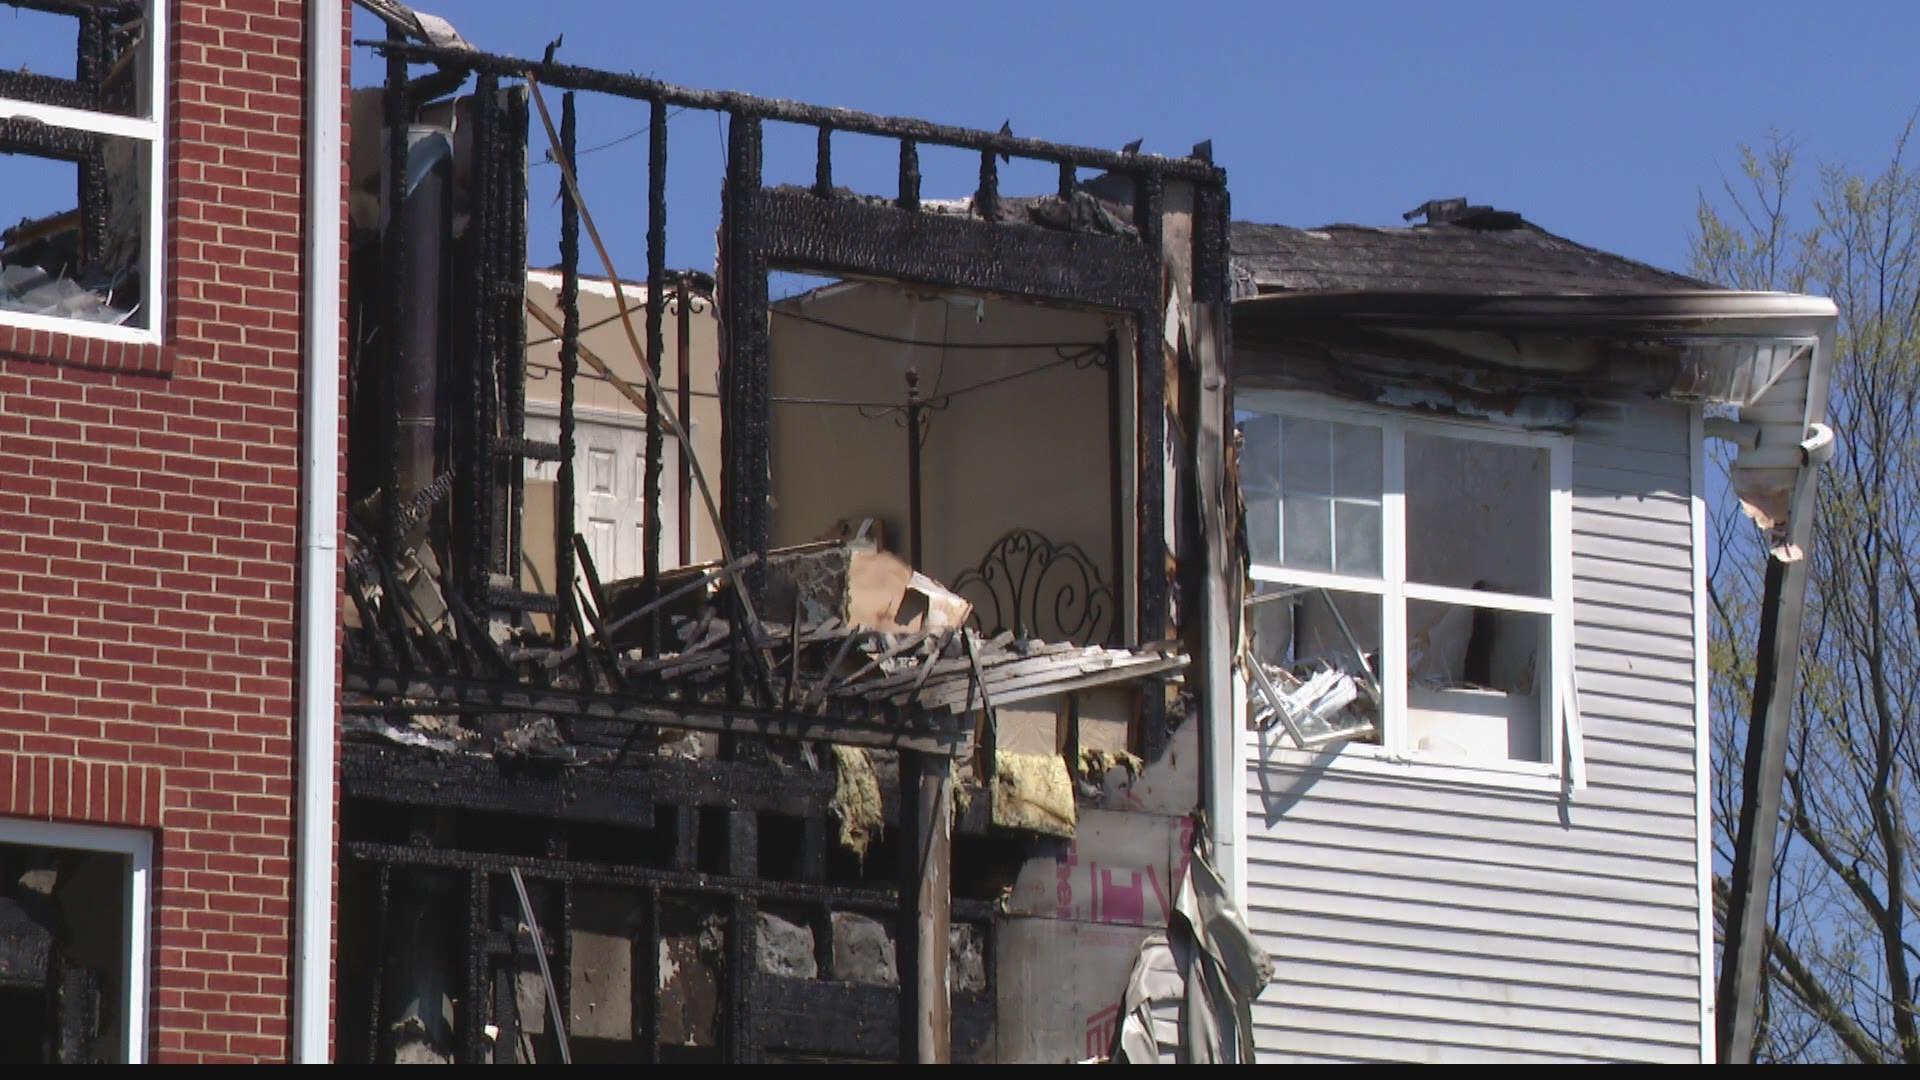 59 residents are getting assistance from the Red Cross after the devastating blaze.